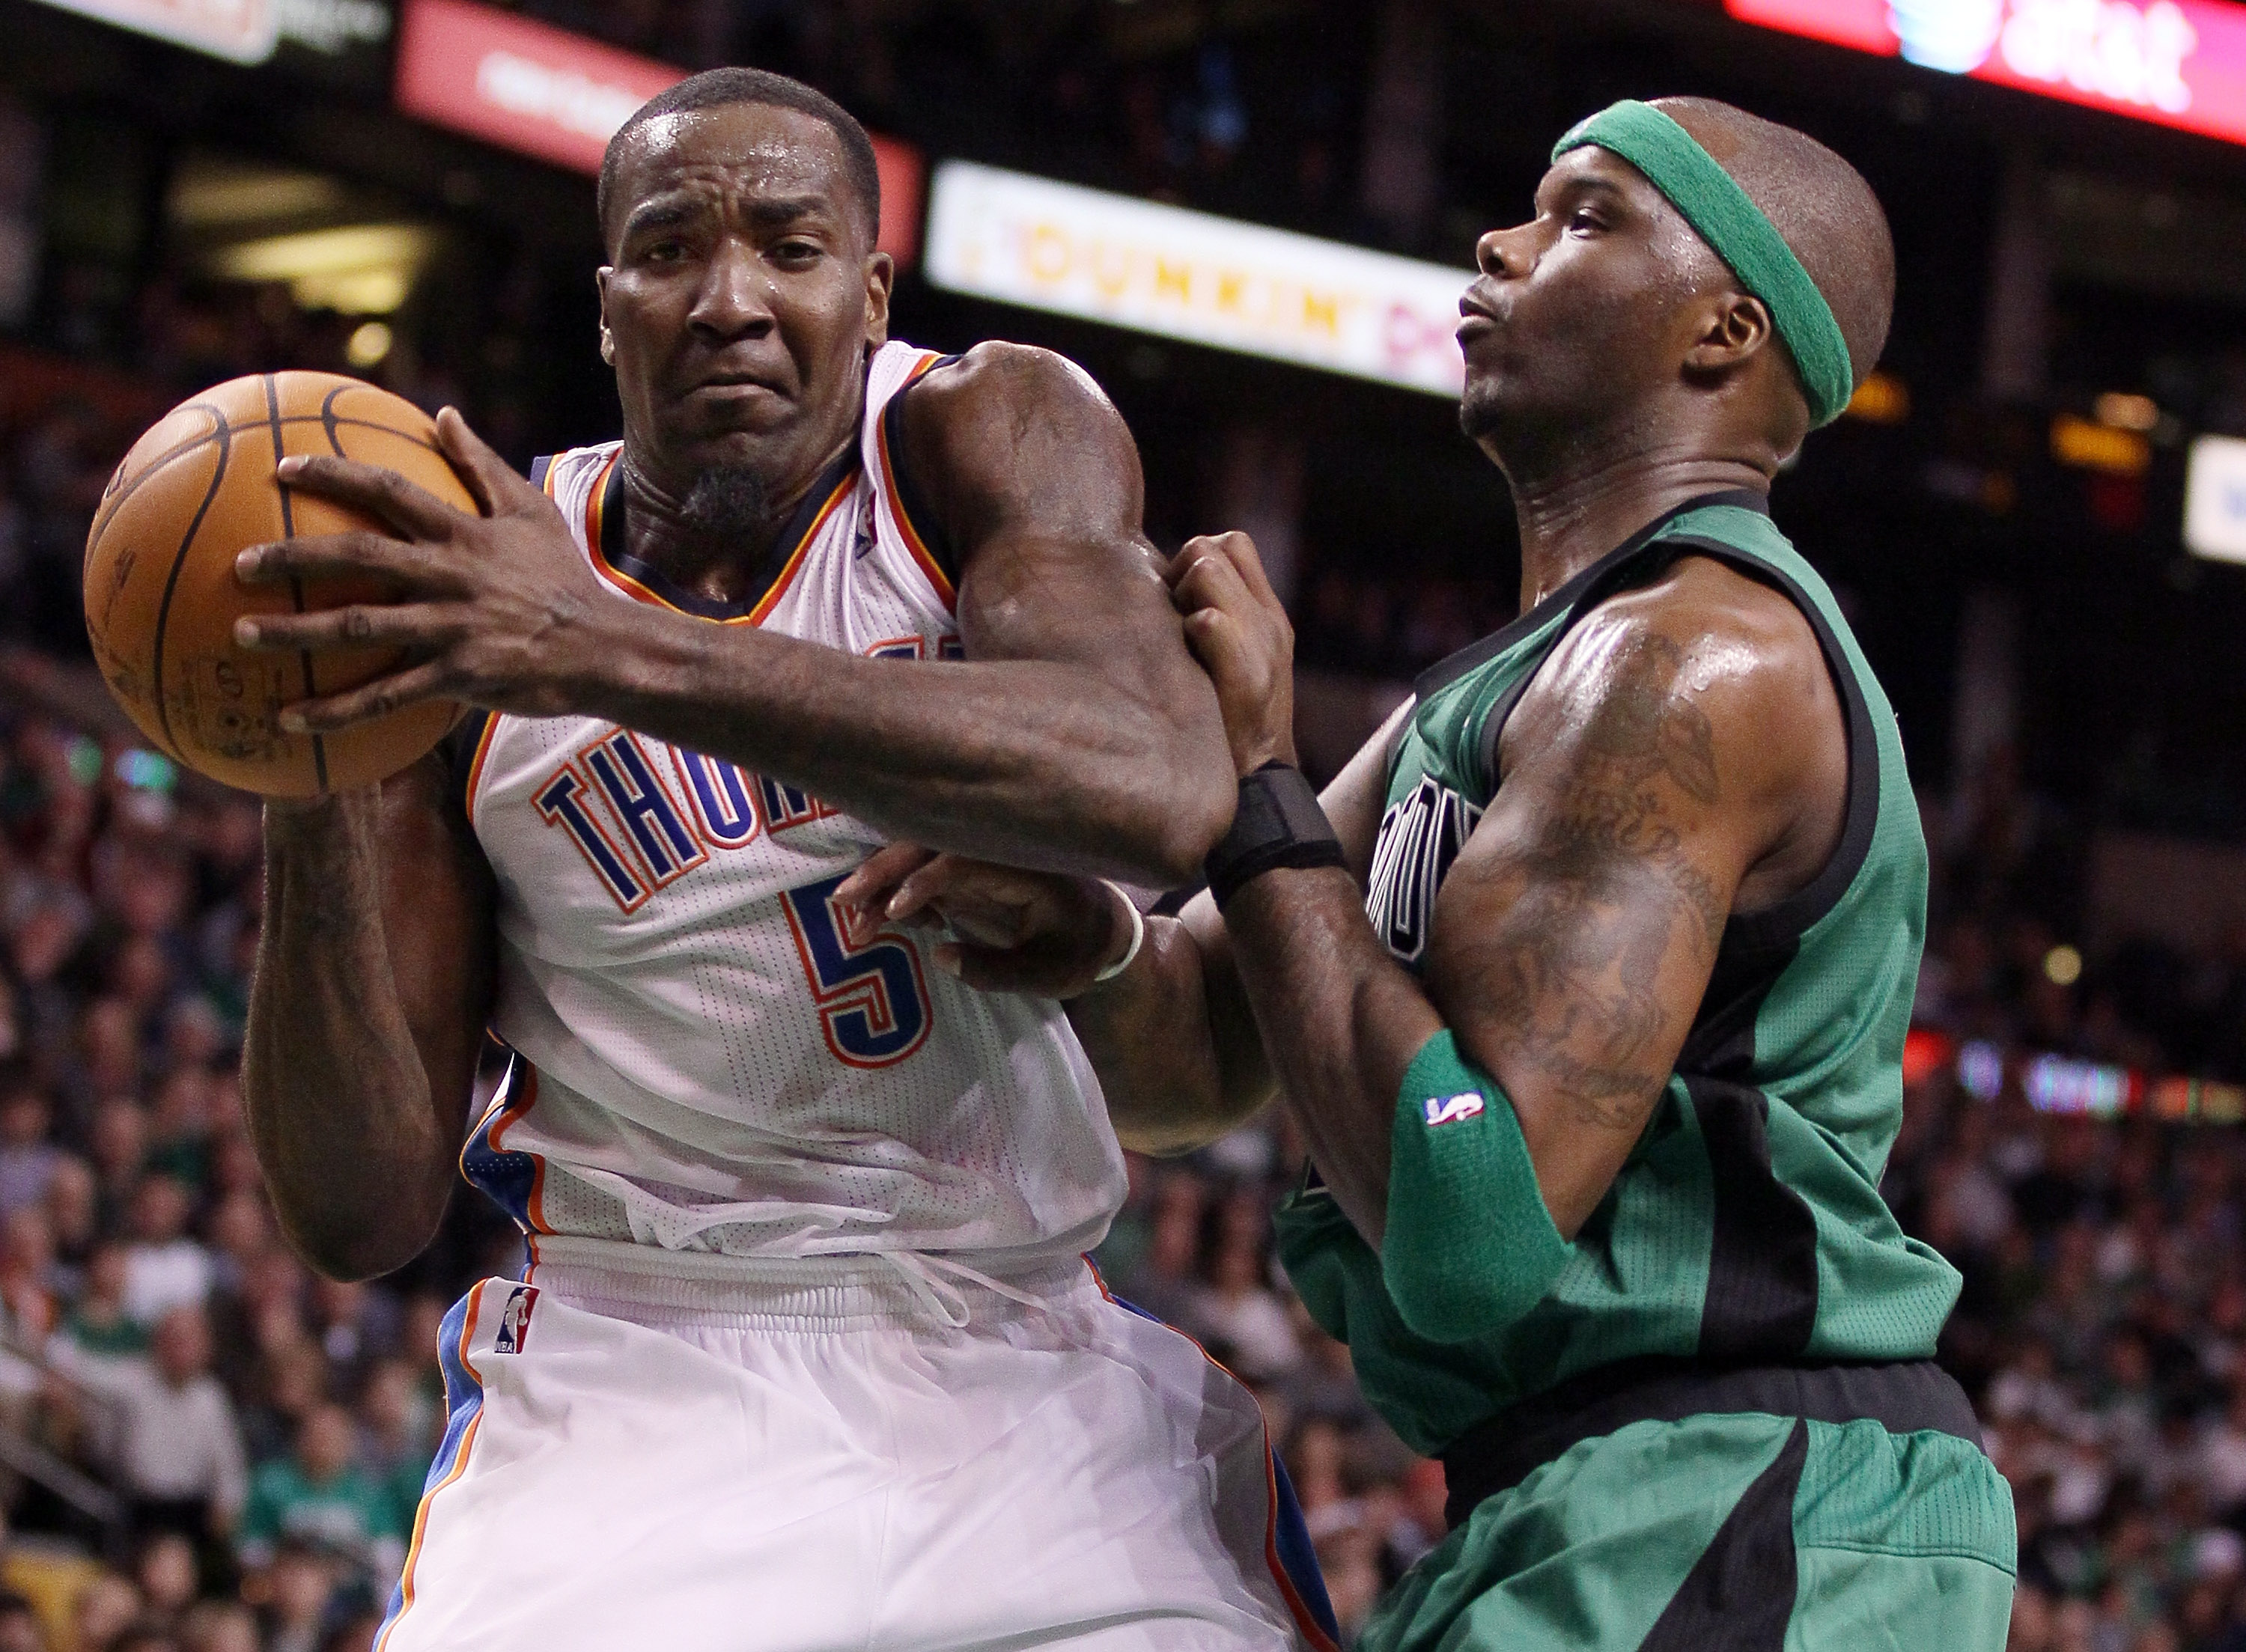 Kendrick Perkins, left, of the Oklahoma City Thunder heads to the net as Jermaine O'Neal of the Boston Celtics defends.